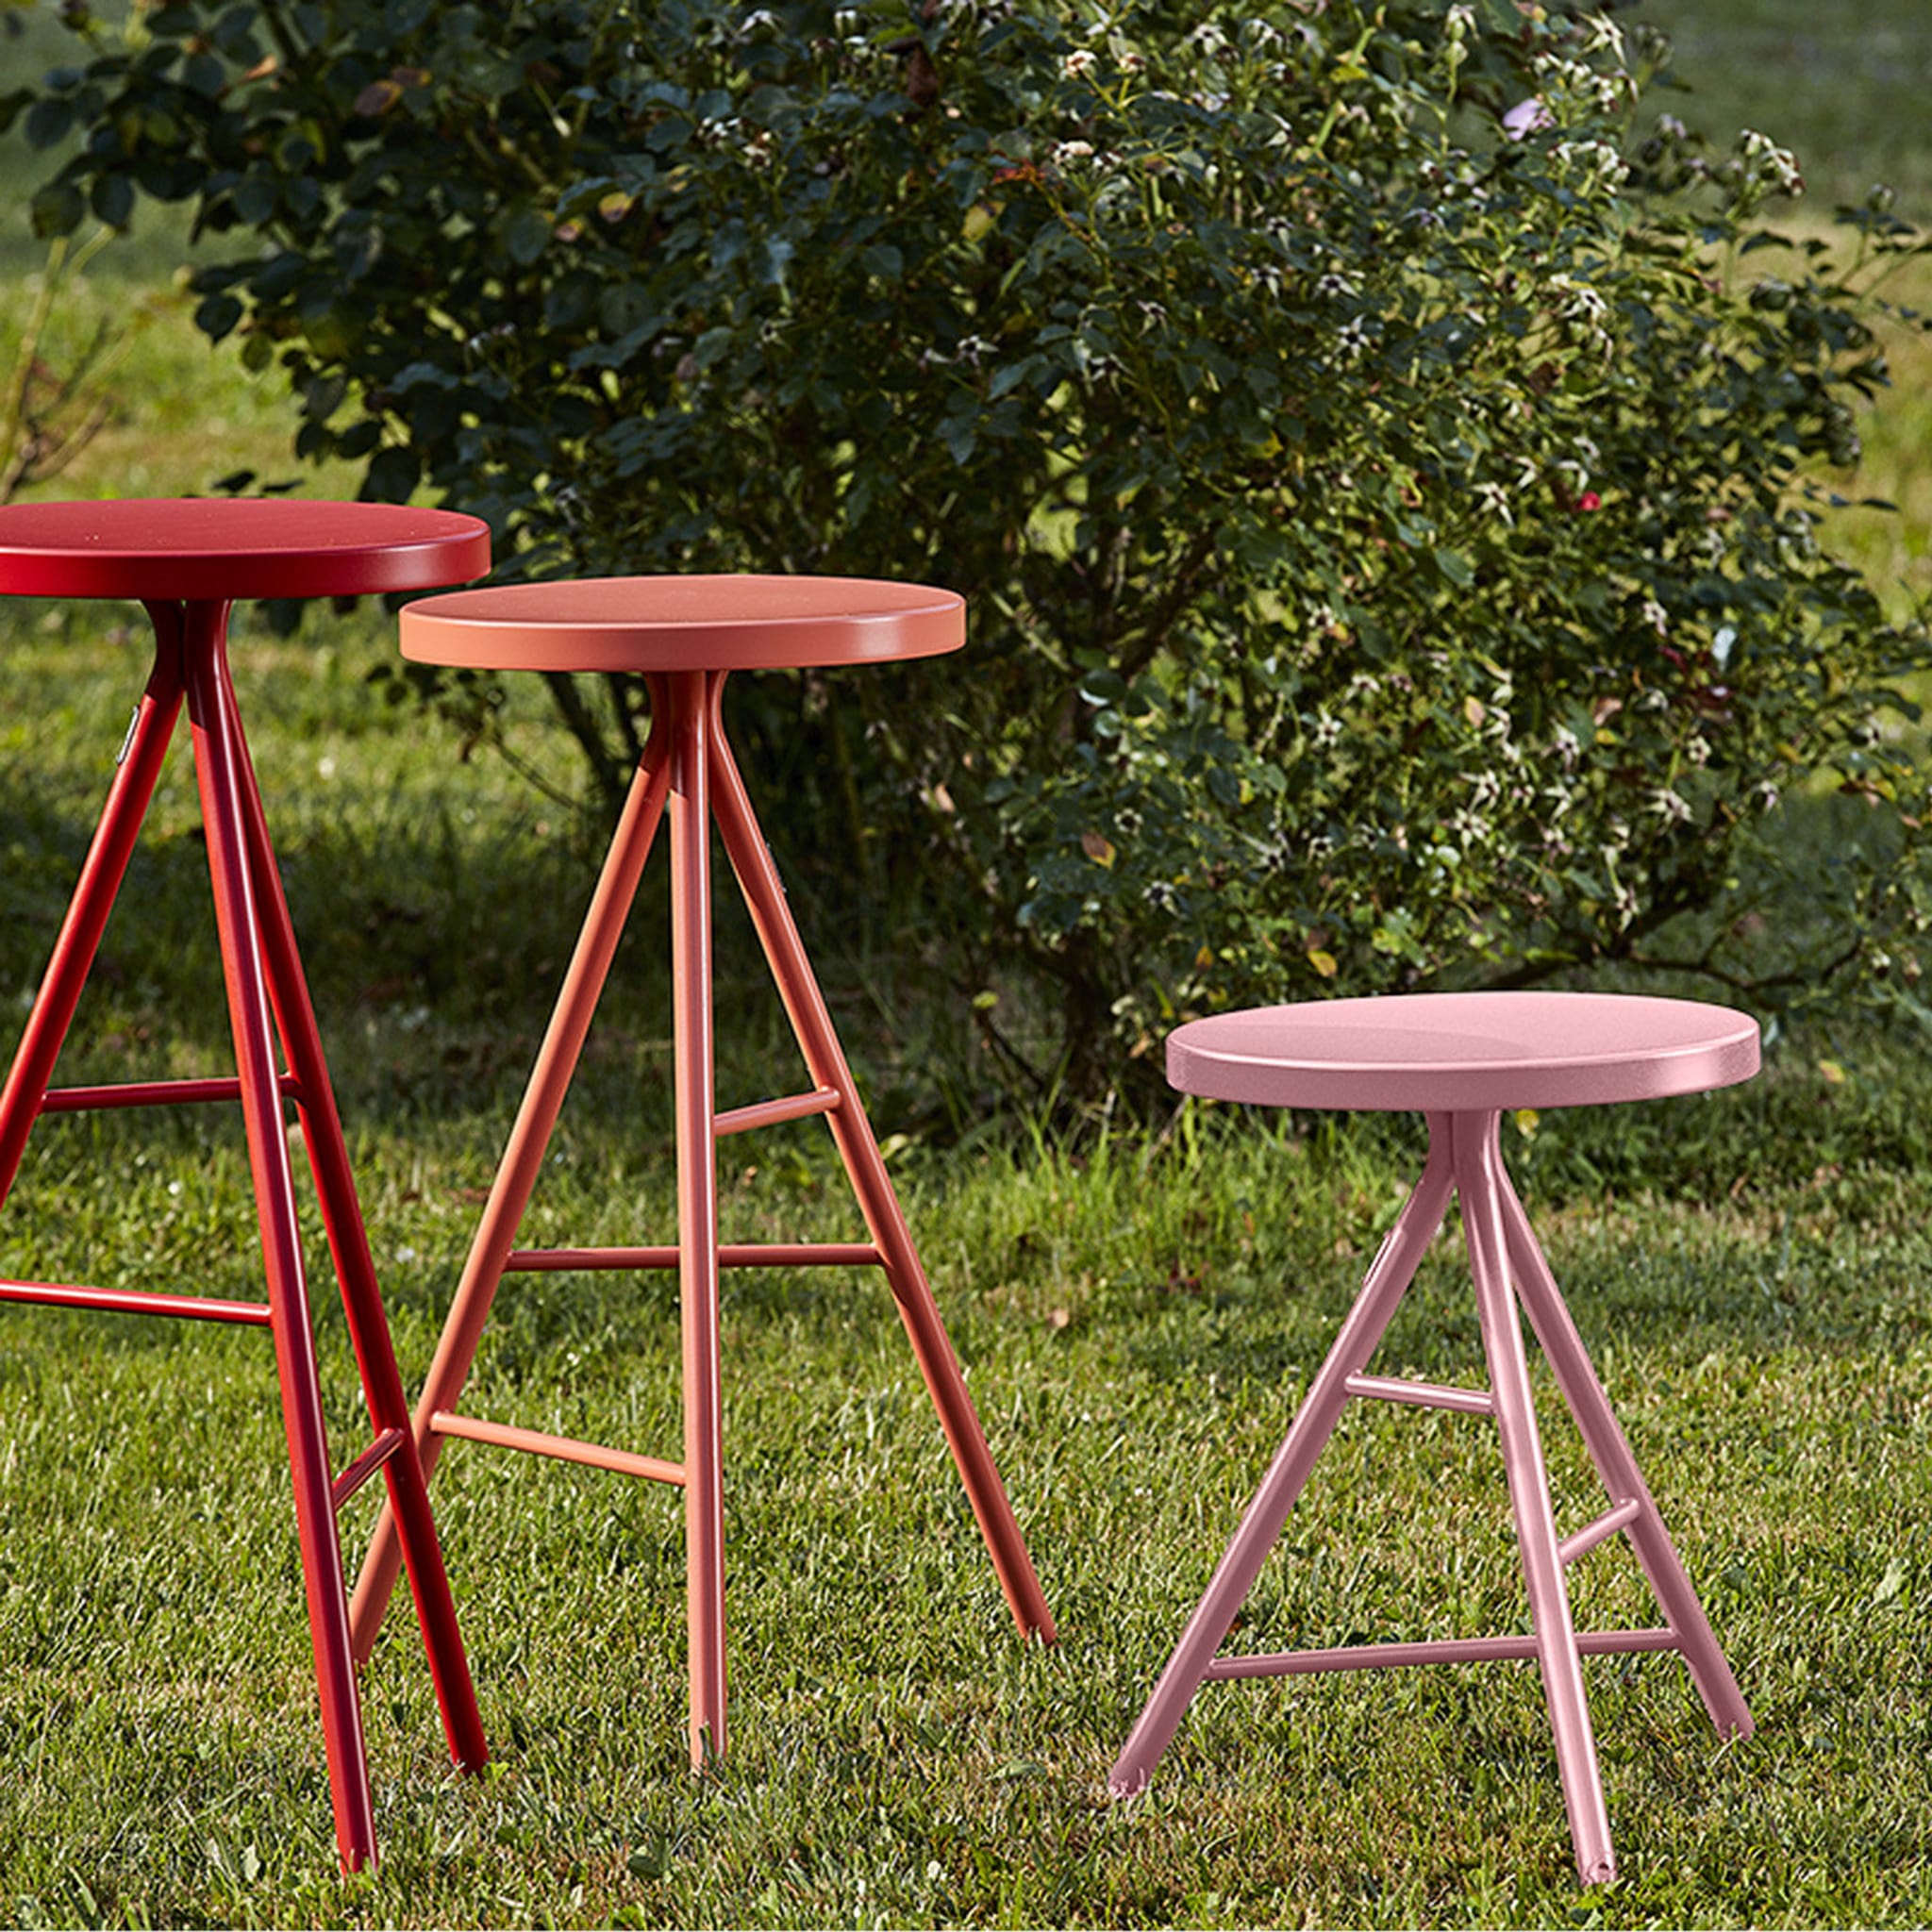 Symple Small Pink Stool - Alternative view 2